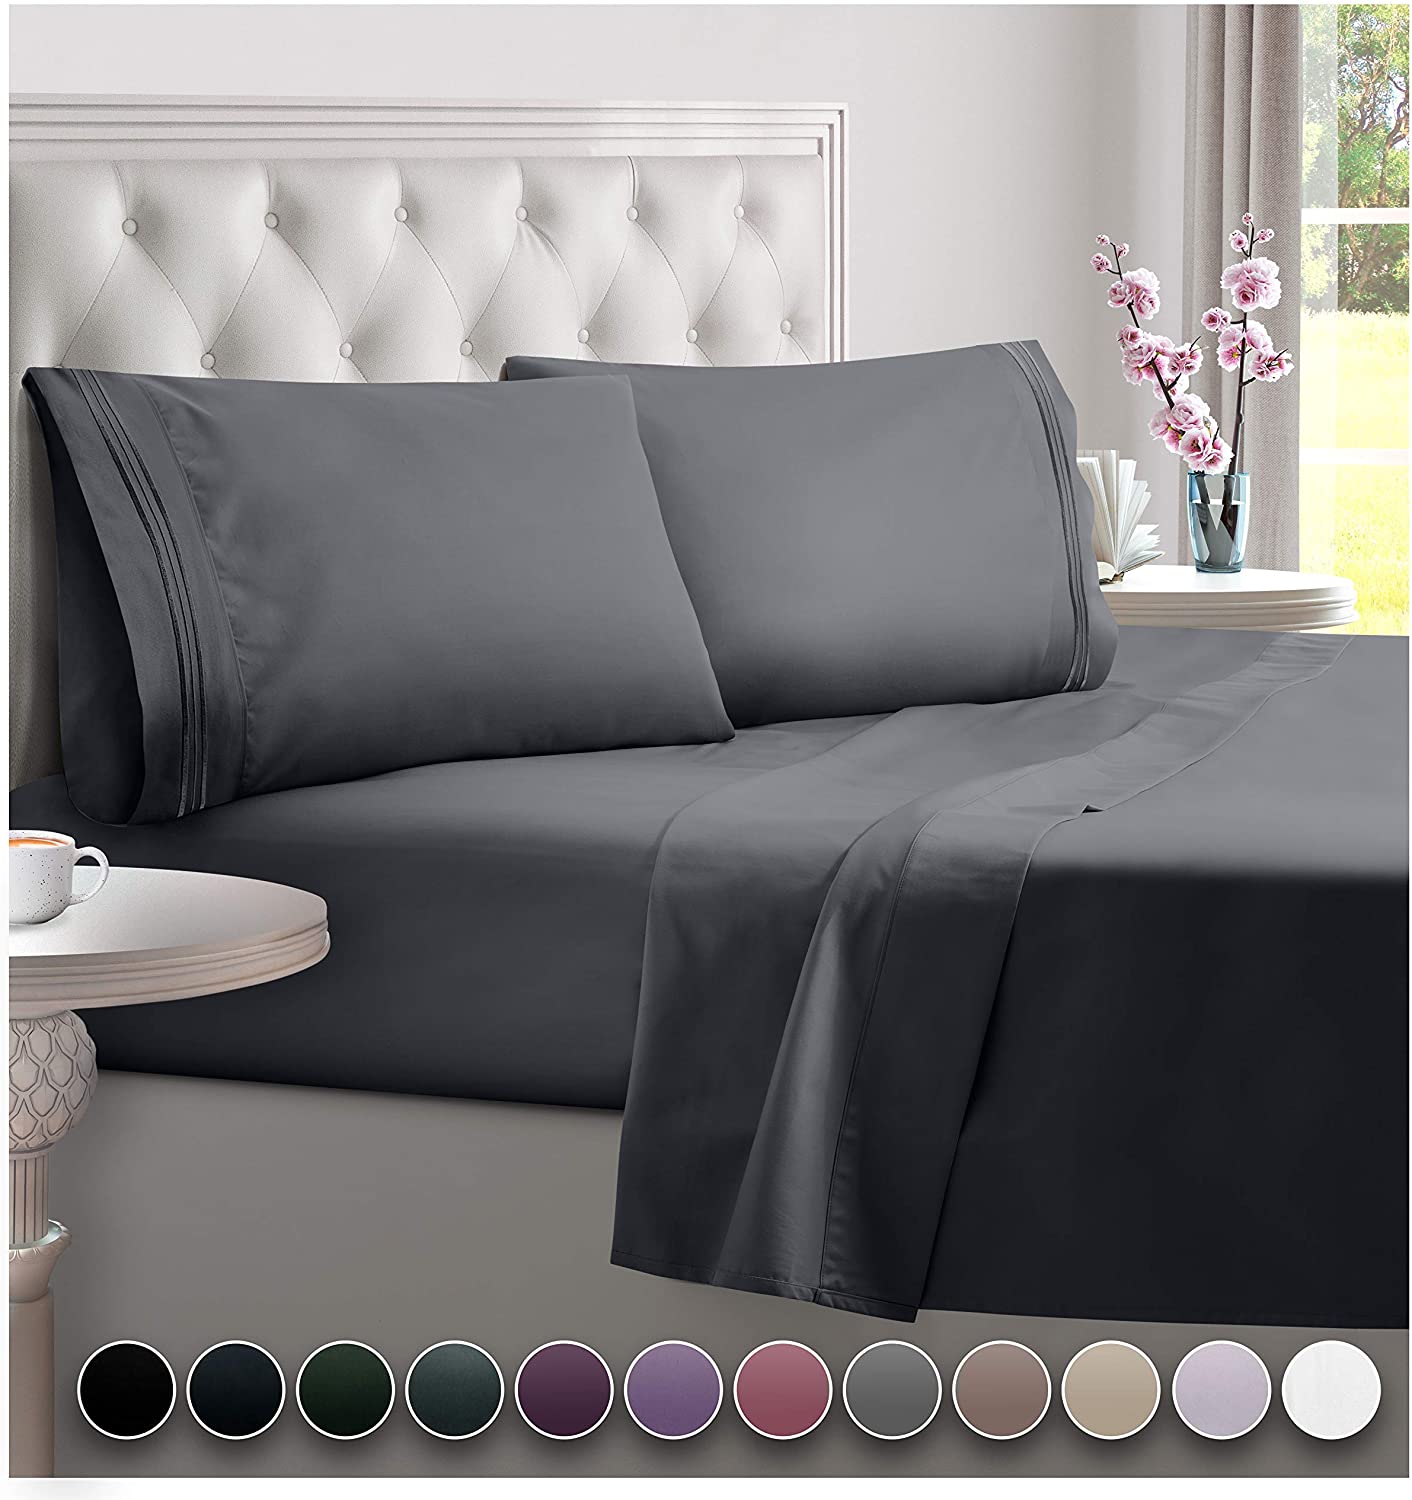 DREAMCARE Full Size Sheet Sets - 4 PCS Set - up to 21 inches